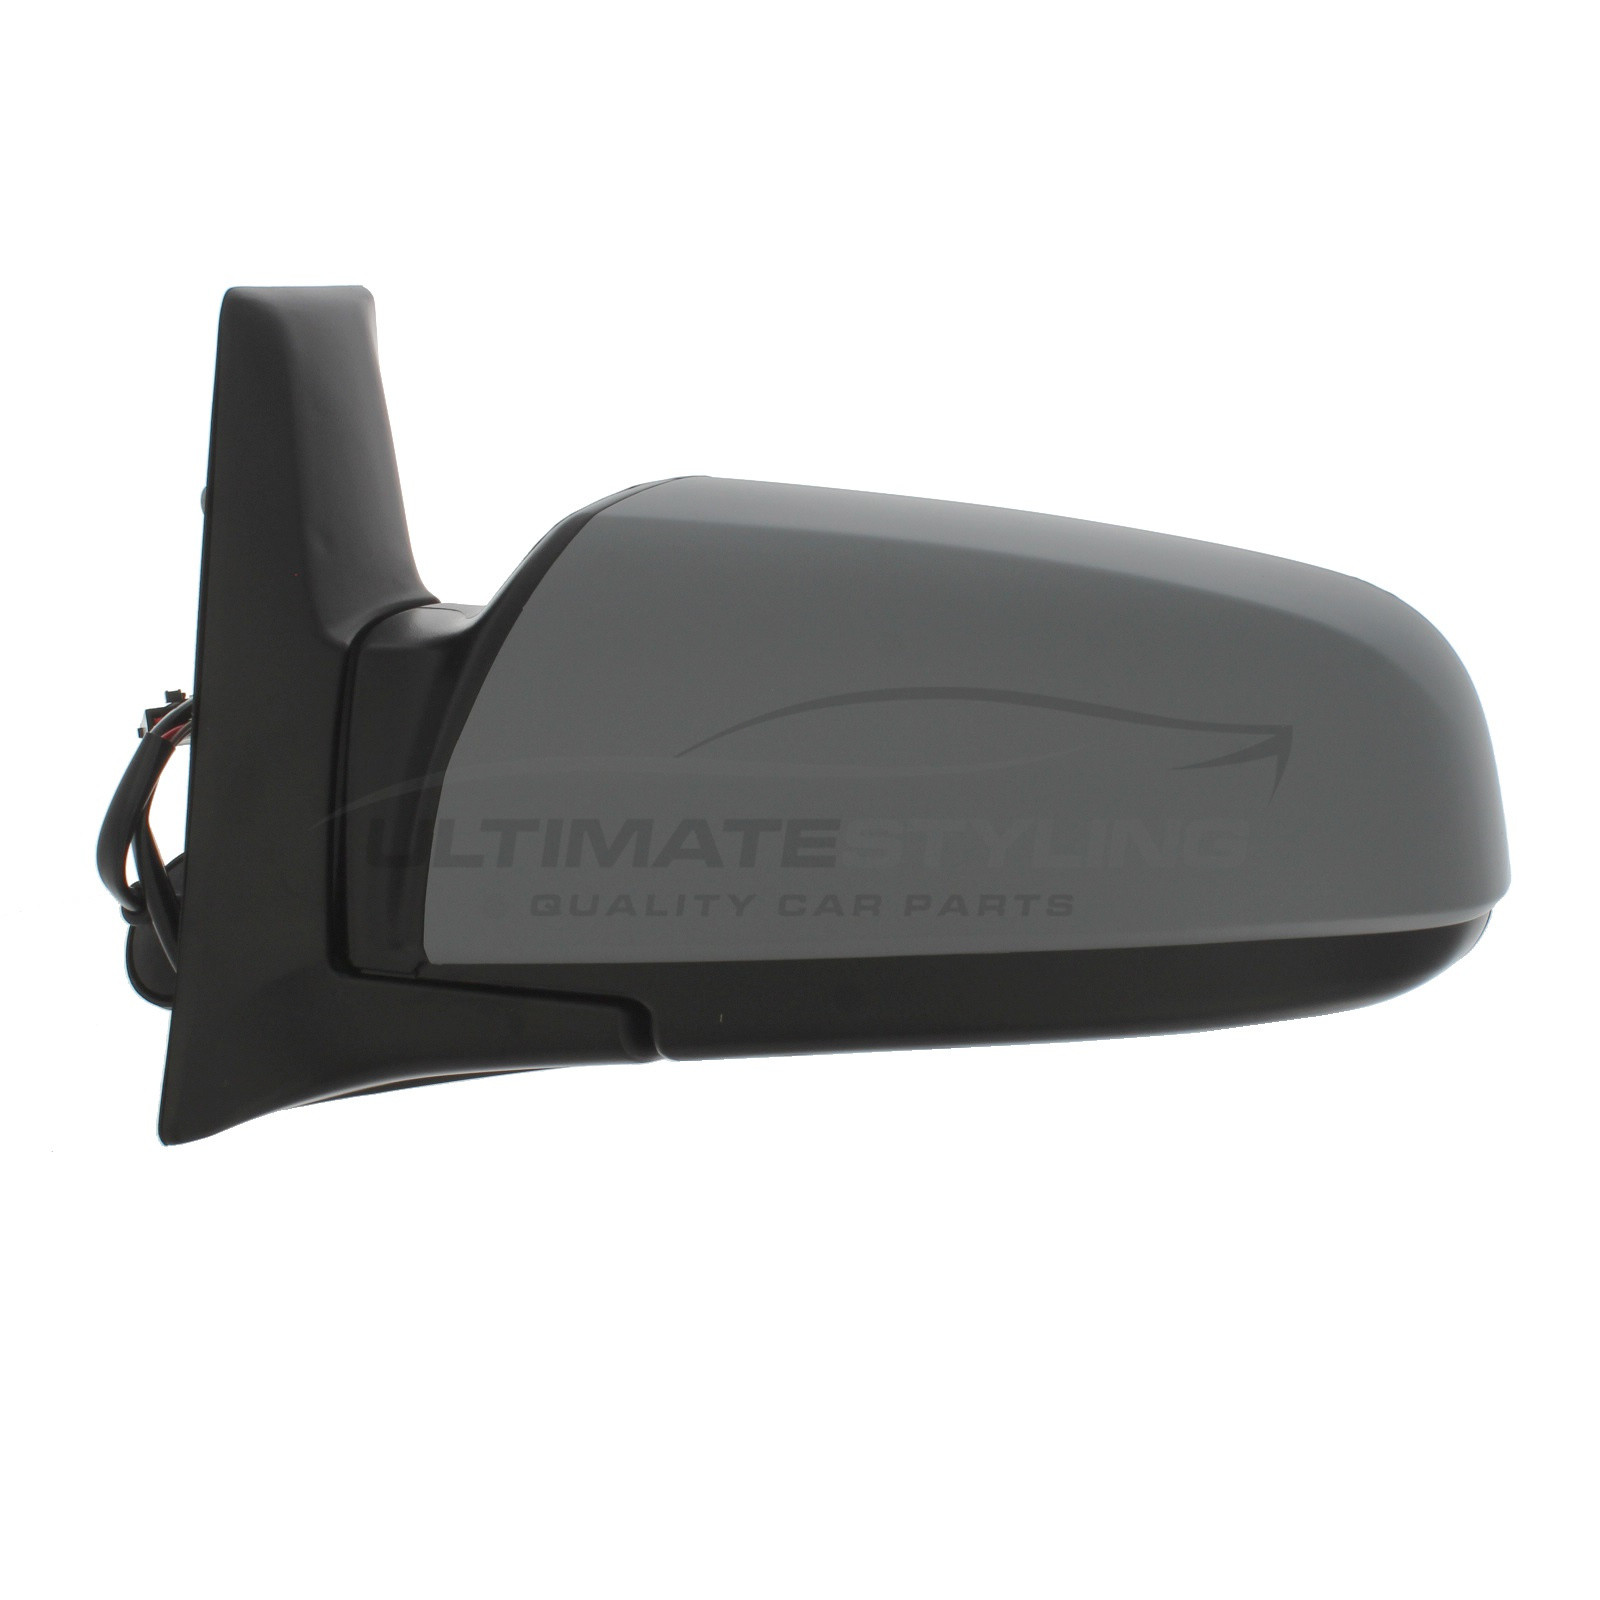 how to change a wing mirror on a vauxhall zafira